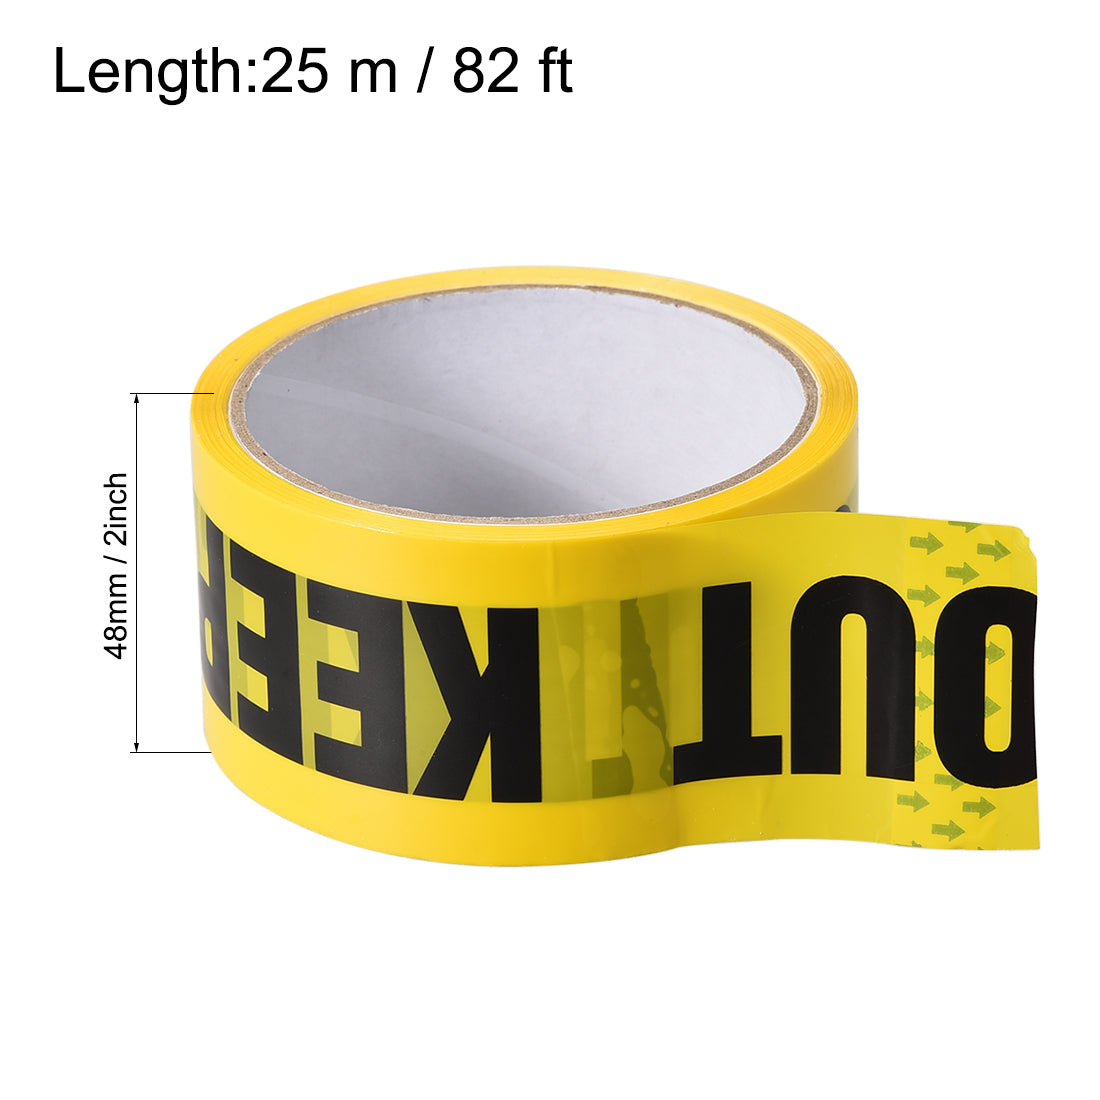 uxcell Uxcell Caution Warning Stripe Sticker Adhesive Tape Bold KEEP OUT Marking, 82 Ft x 2 Inch(LxW), Yellow Black for Workplace Wet Floor Caution